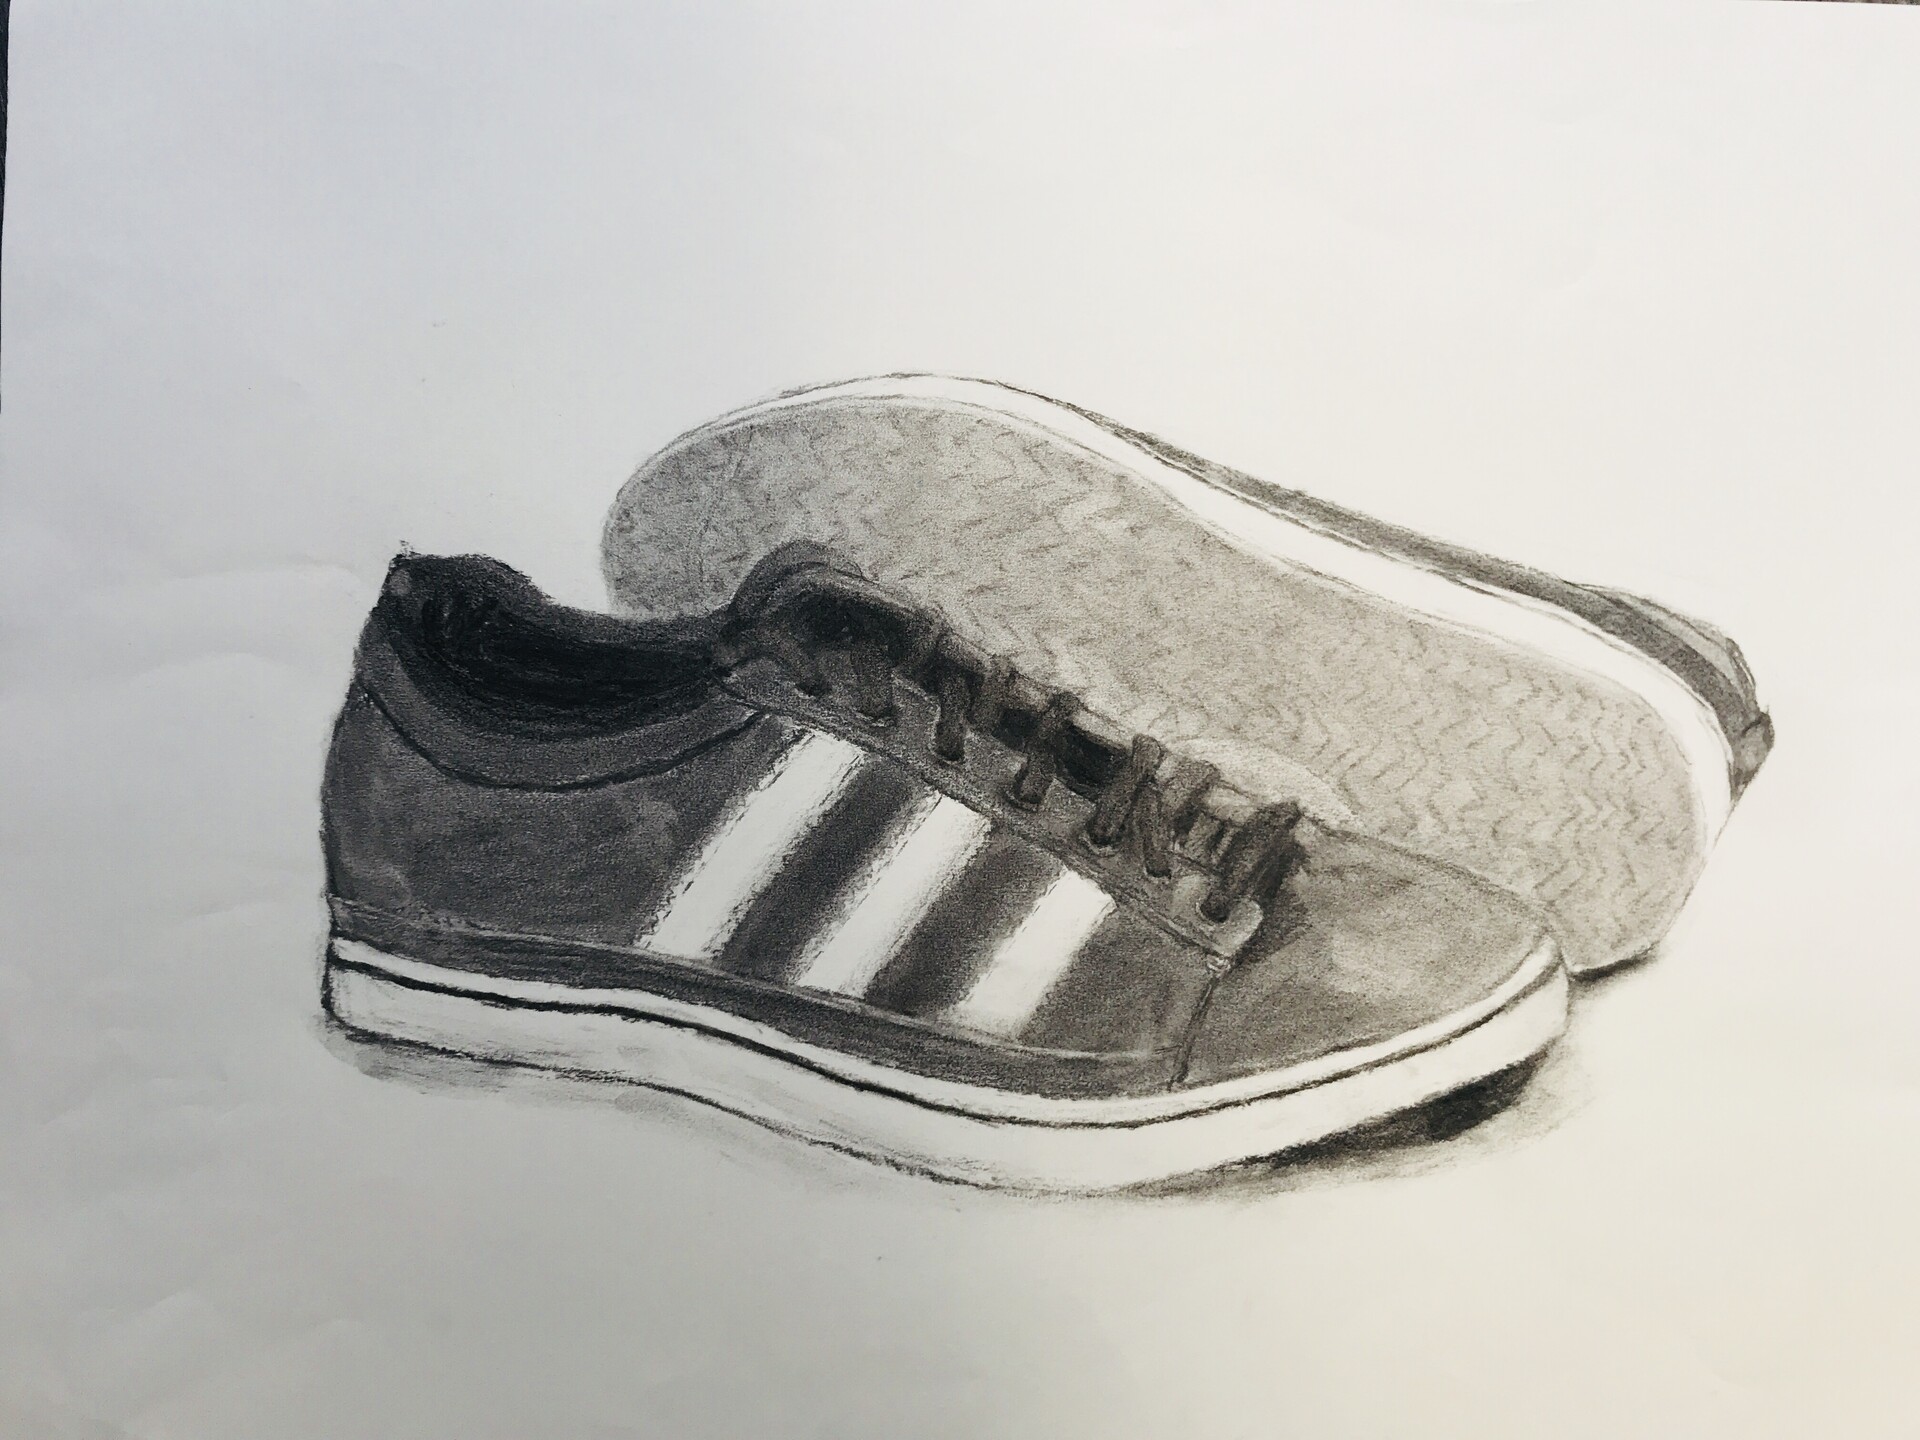 ArtStation - Drawing shoes with charcoal